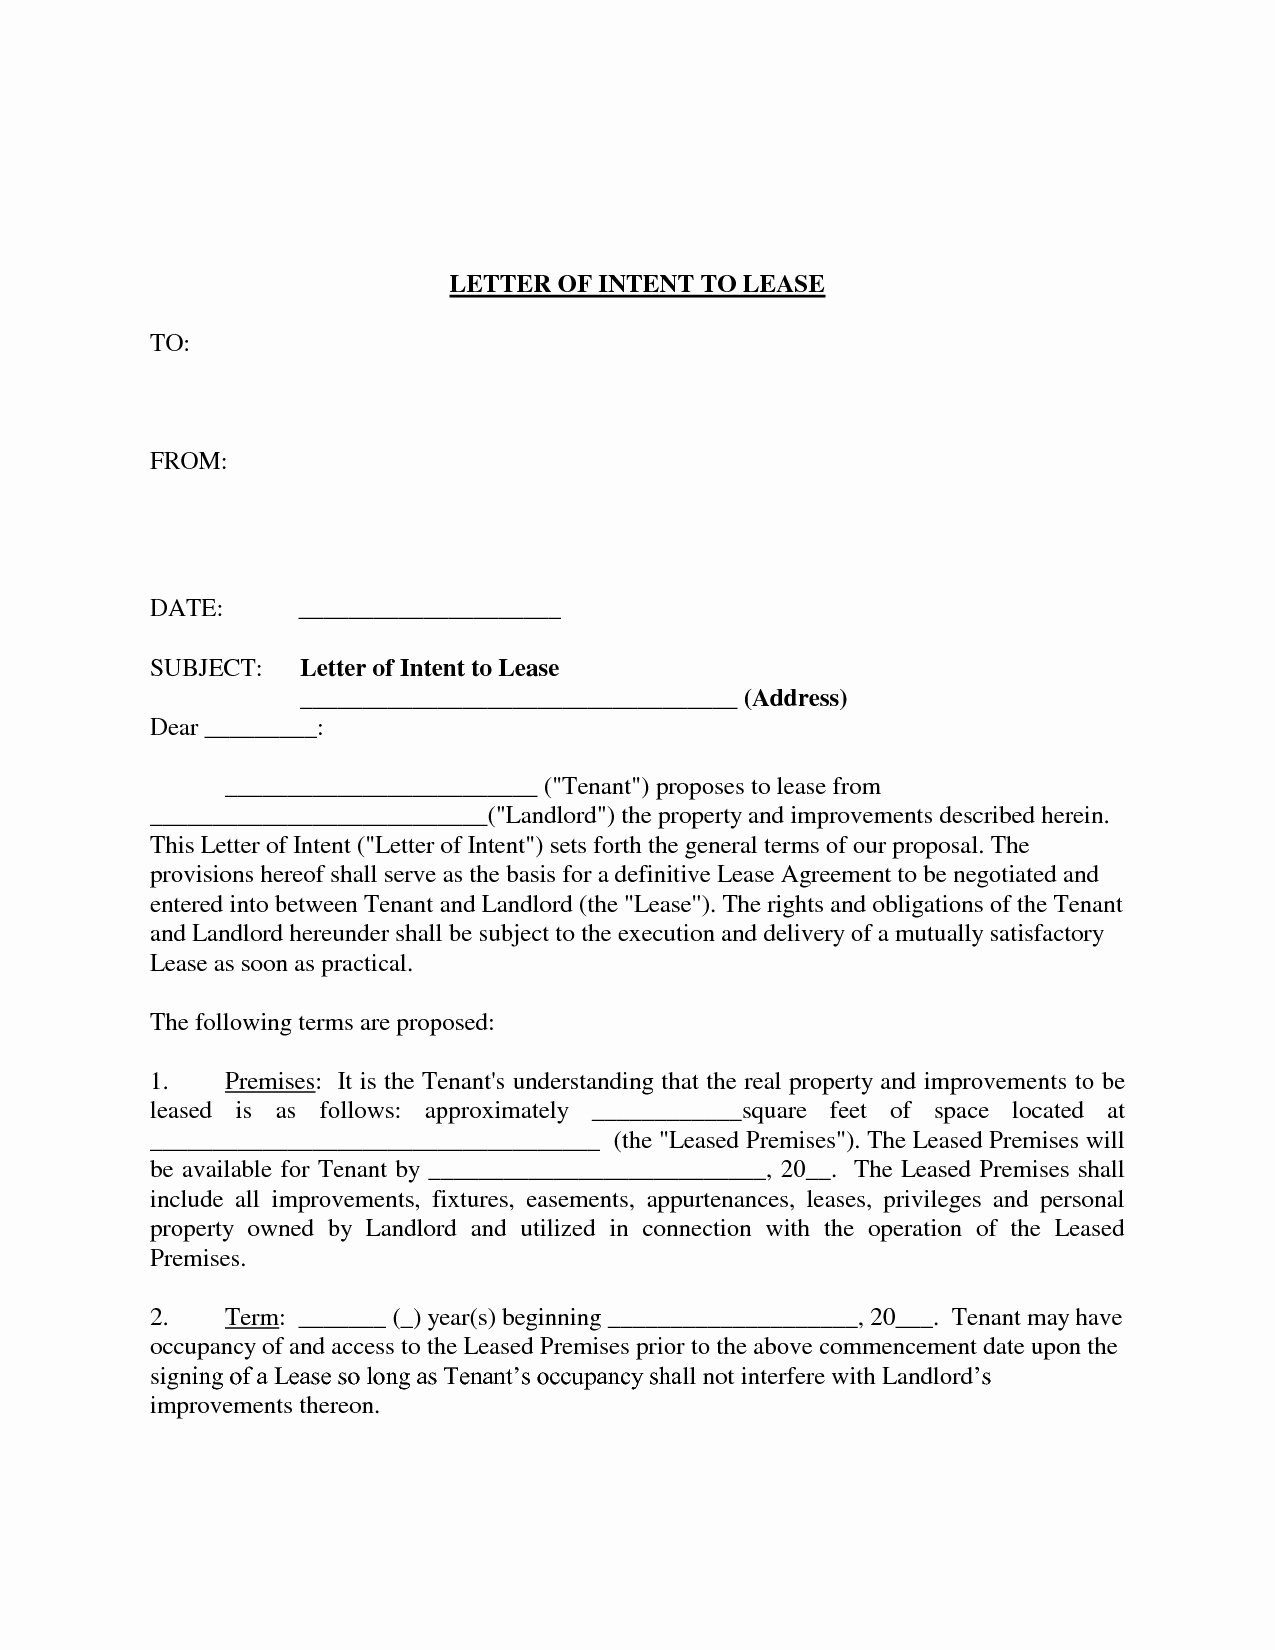 Rental Letter Of Intent Elegant Free Letter Intent to Lease Mercial Space Template